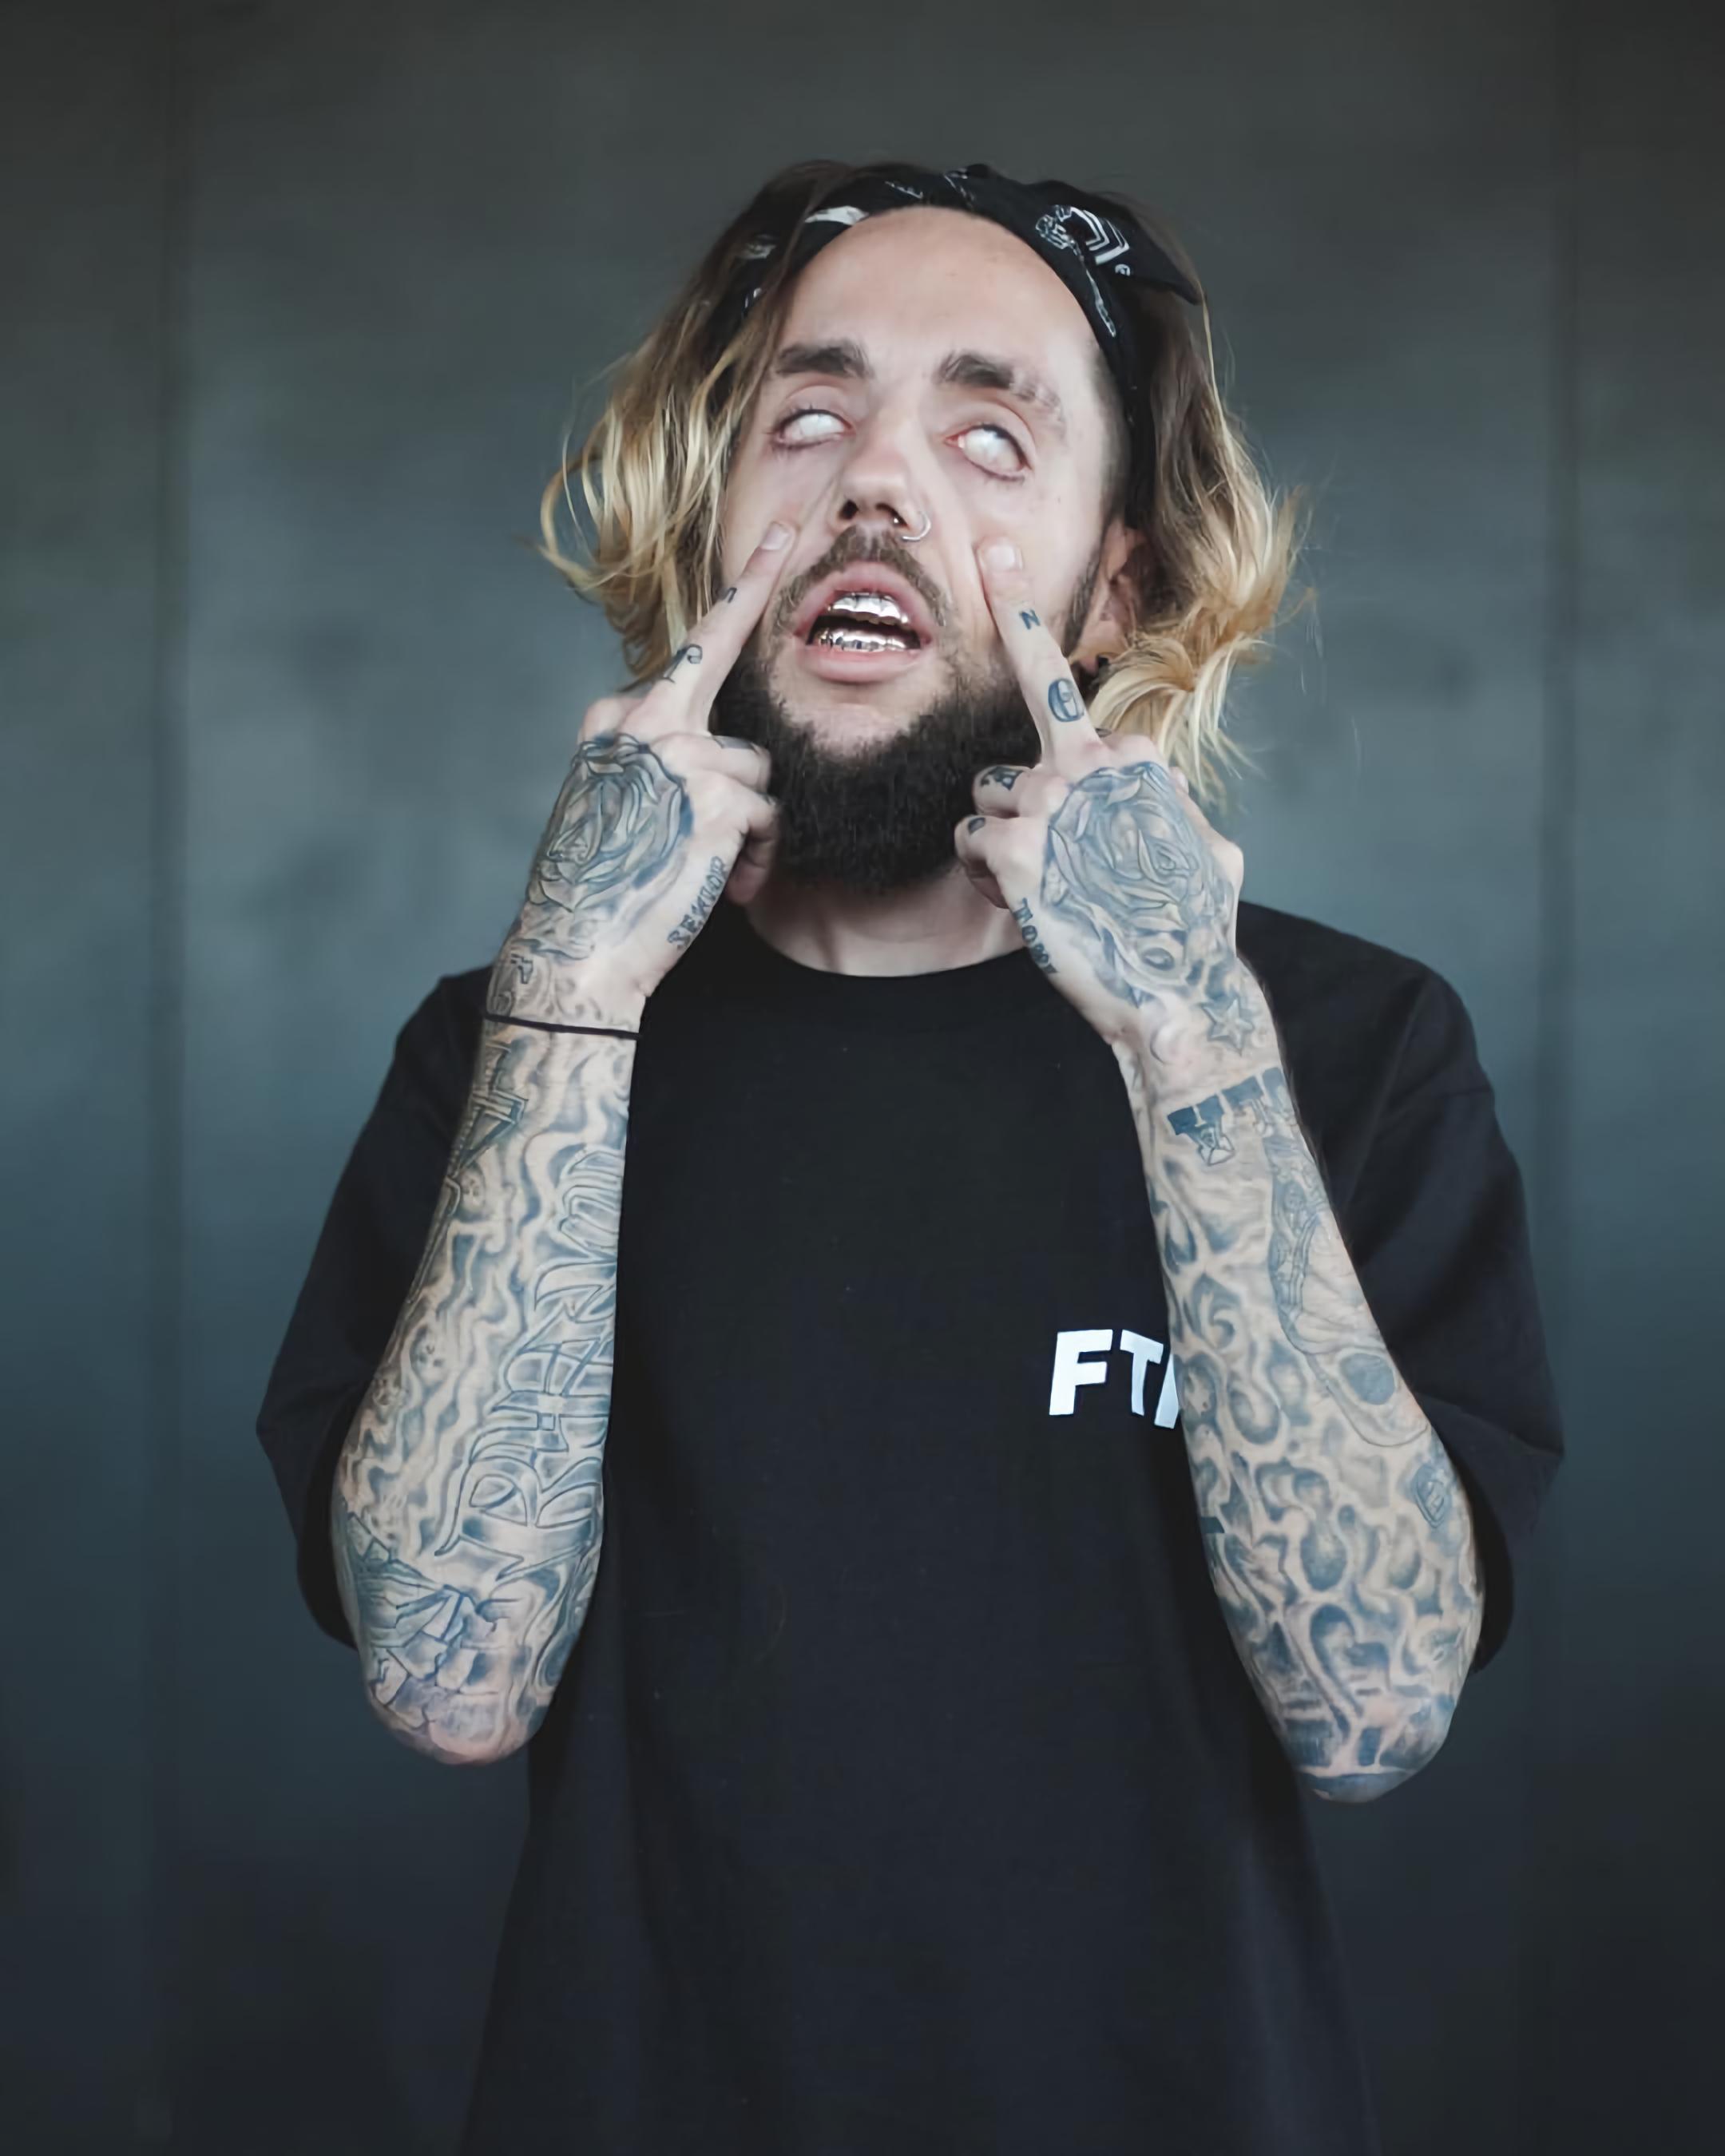 Thought I'd share my upscaled pic of $crim, if you need anything